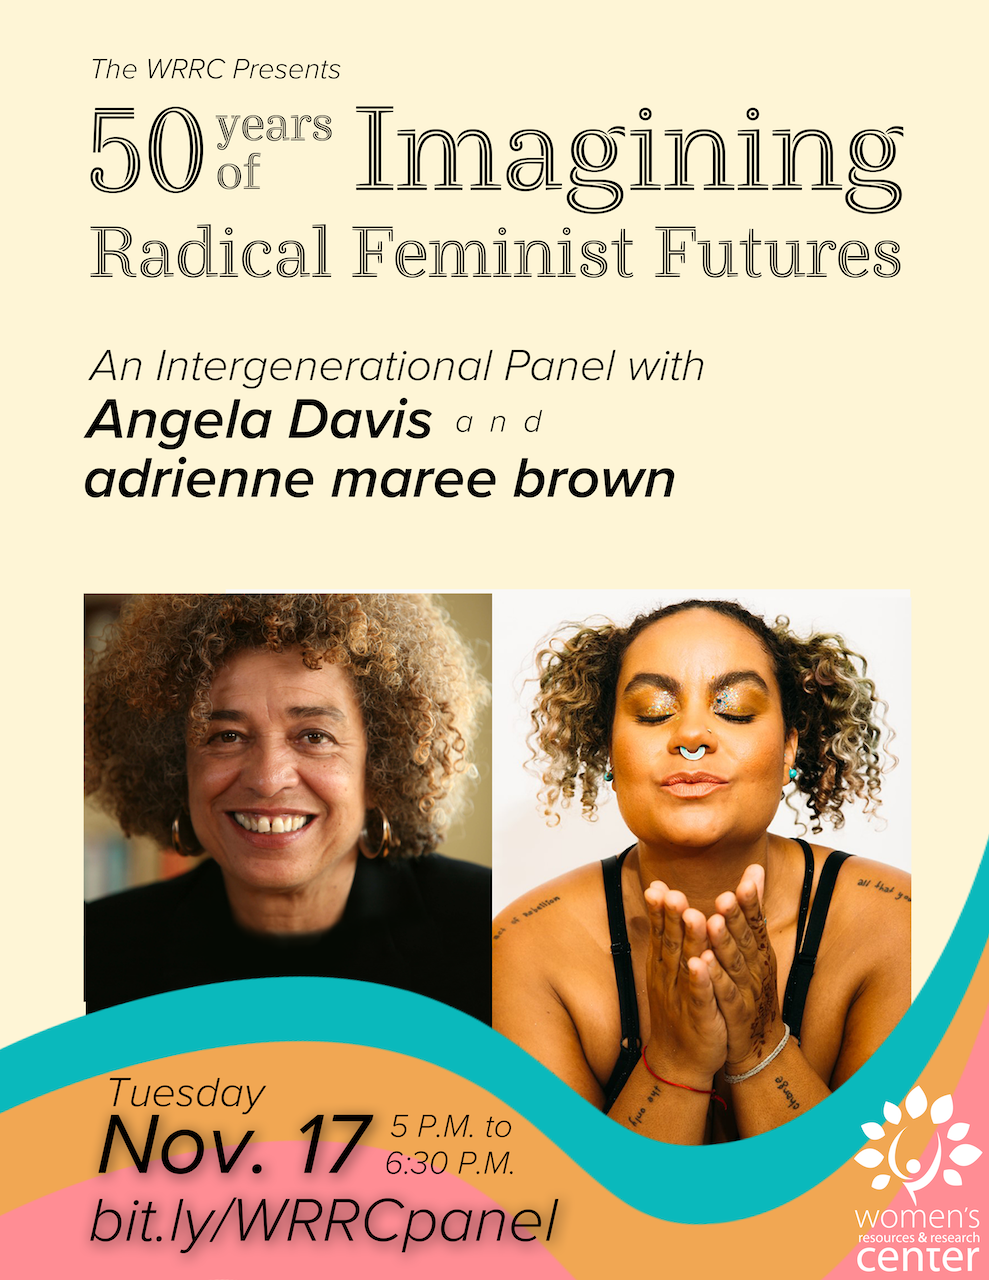 Image of Dr. Angela Davis and adrienne maree brown on a flyer for the WRRC 50th anniversary intergenerational panel